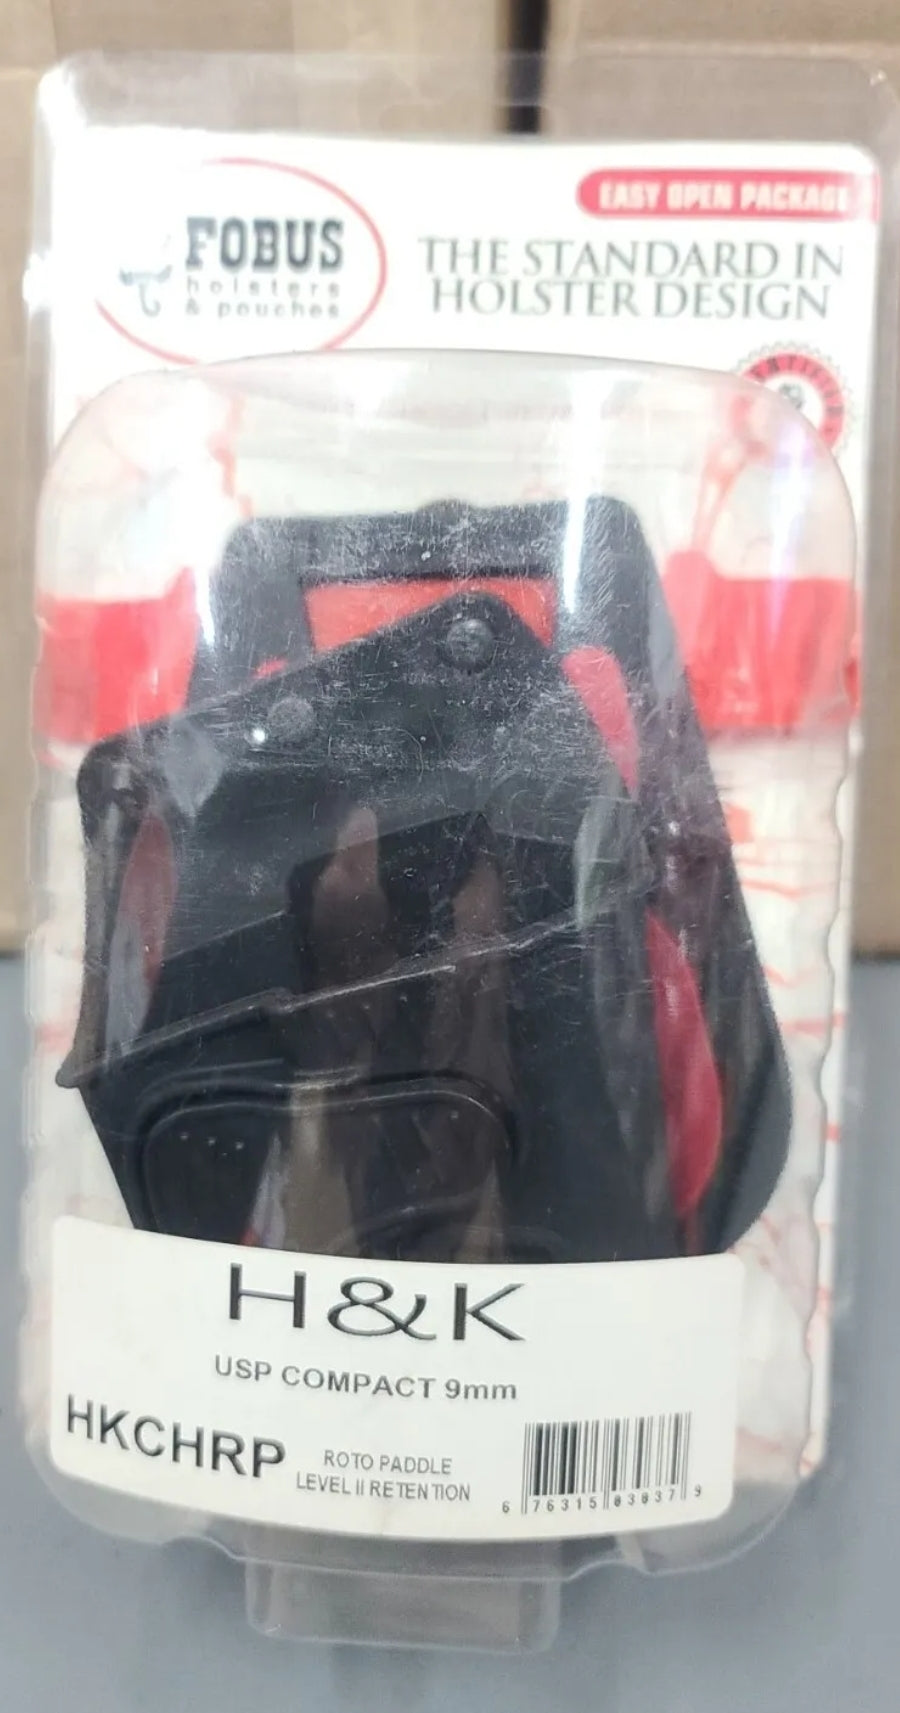 Fobus Holster Rapid Release Level 2 PADDLE Right Hand #HKCHRP H&K HK USP COMPACT 9MM